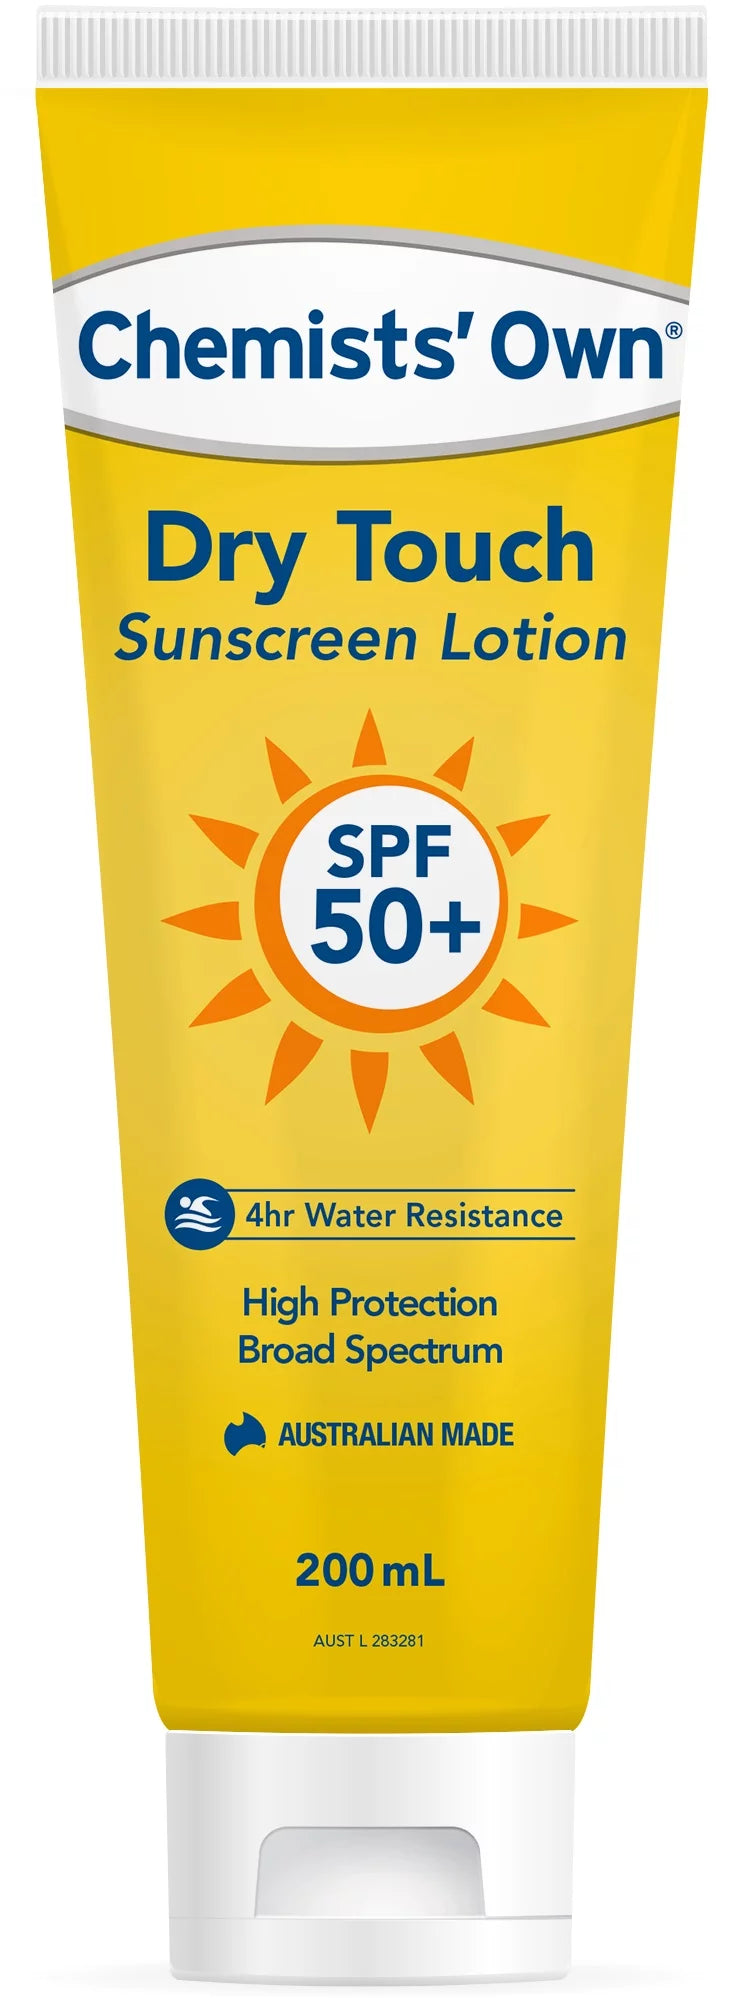 Chemists’ Own® Dry Touch Sunscreen SPF 50+ 200mL